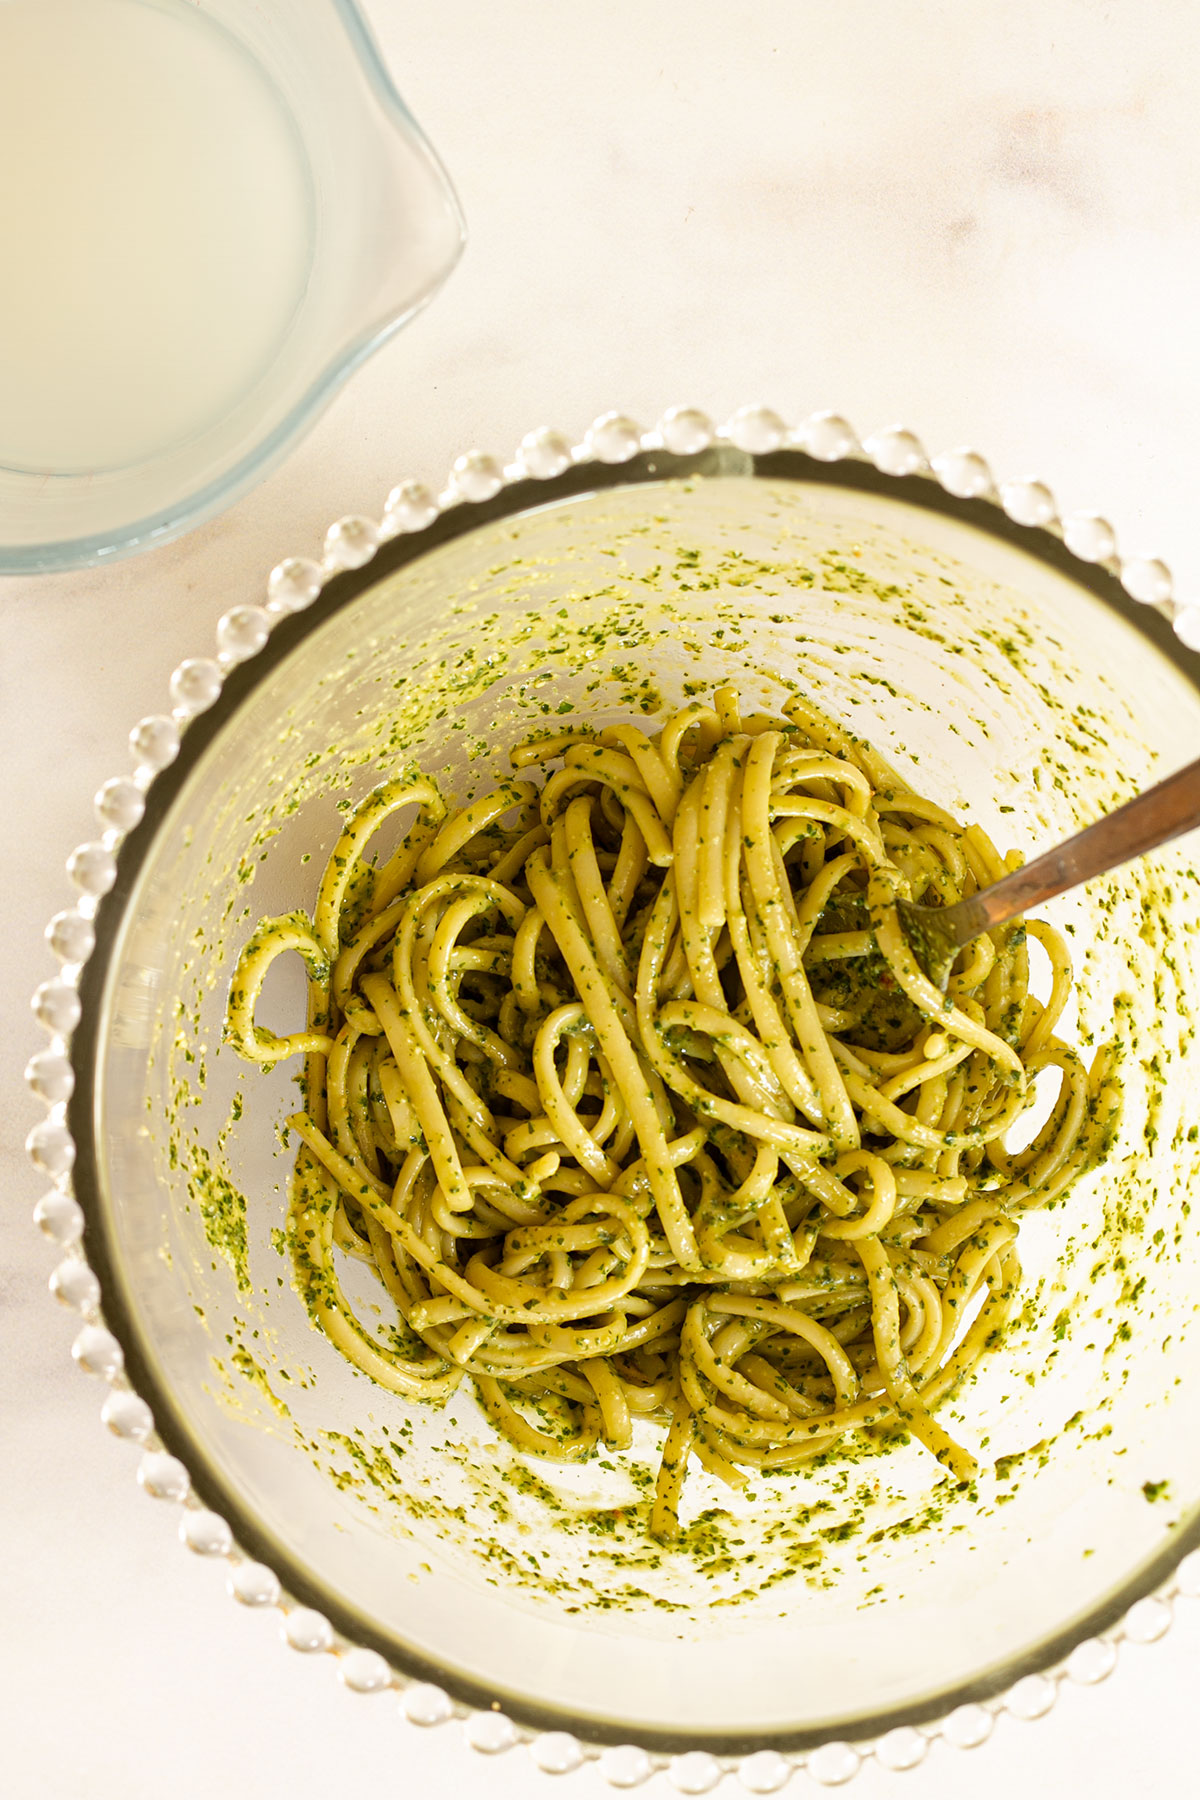 Cooked drained pasta with pesto added, in a glass bowl.